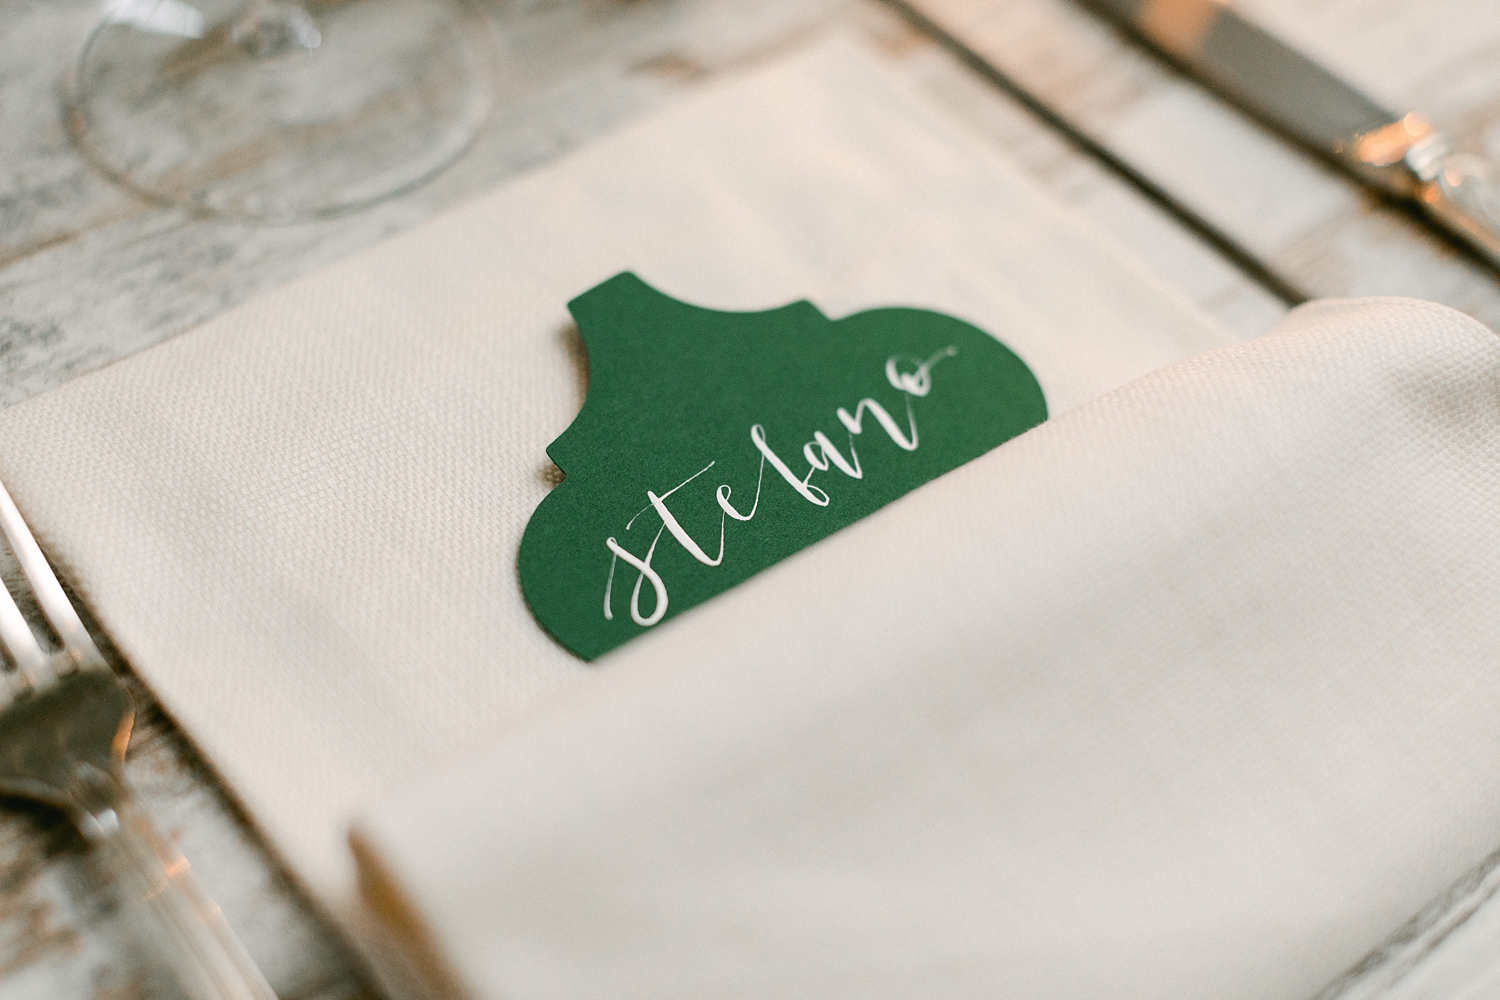 Green Name card at wedding reception with Stefano writer in white cursive font